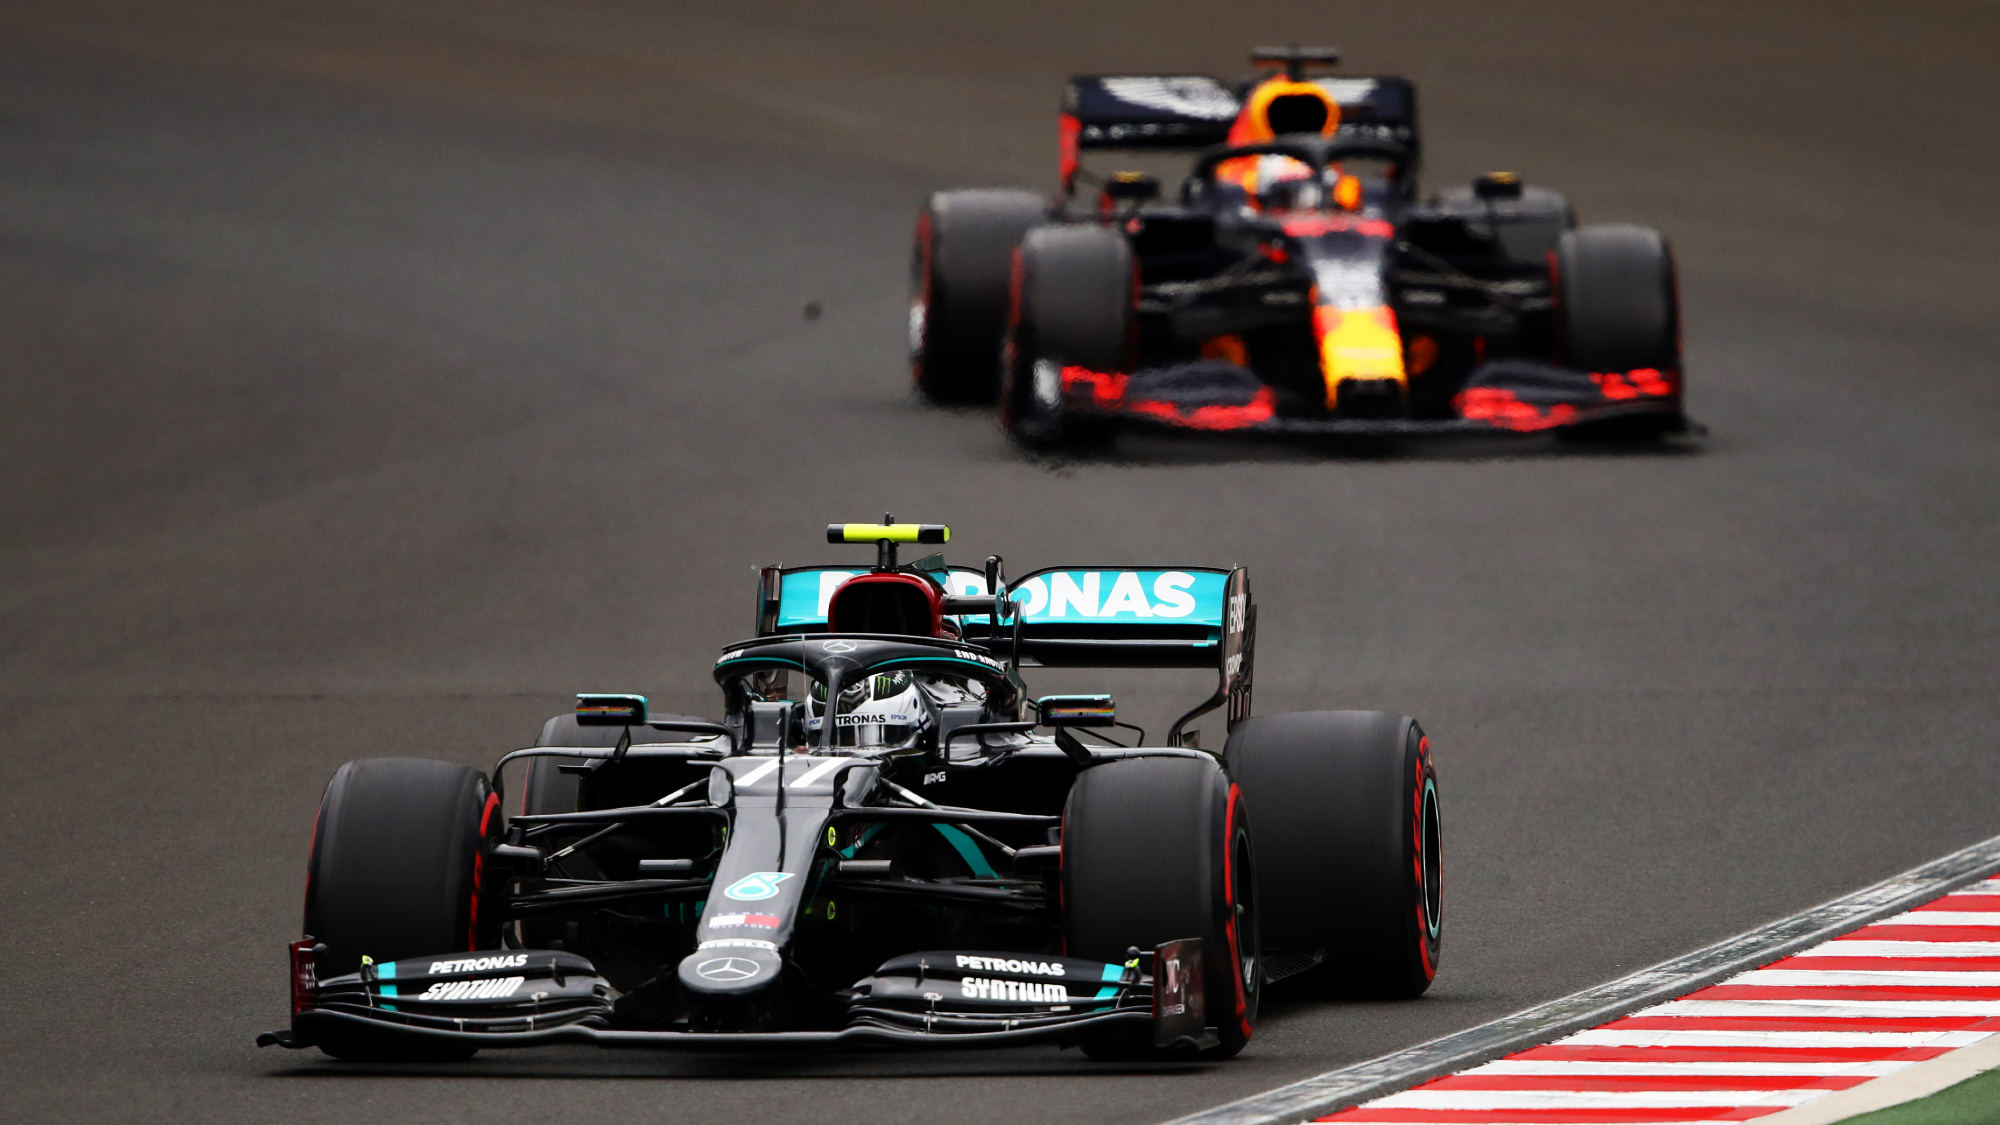 Why is Mercedes f1 engine so good?